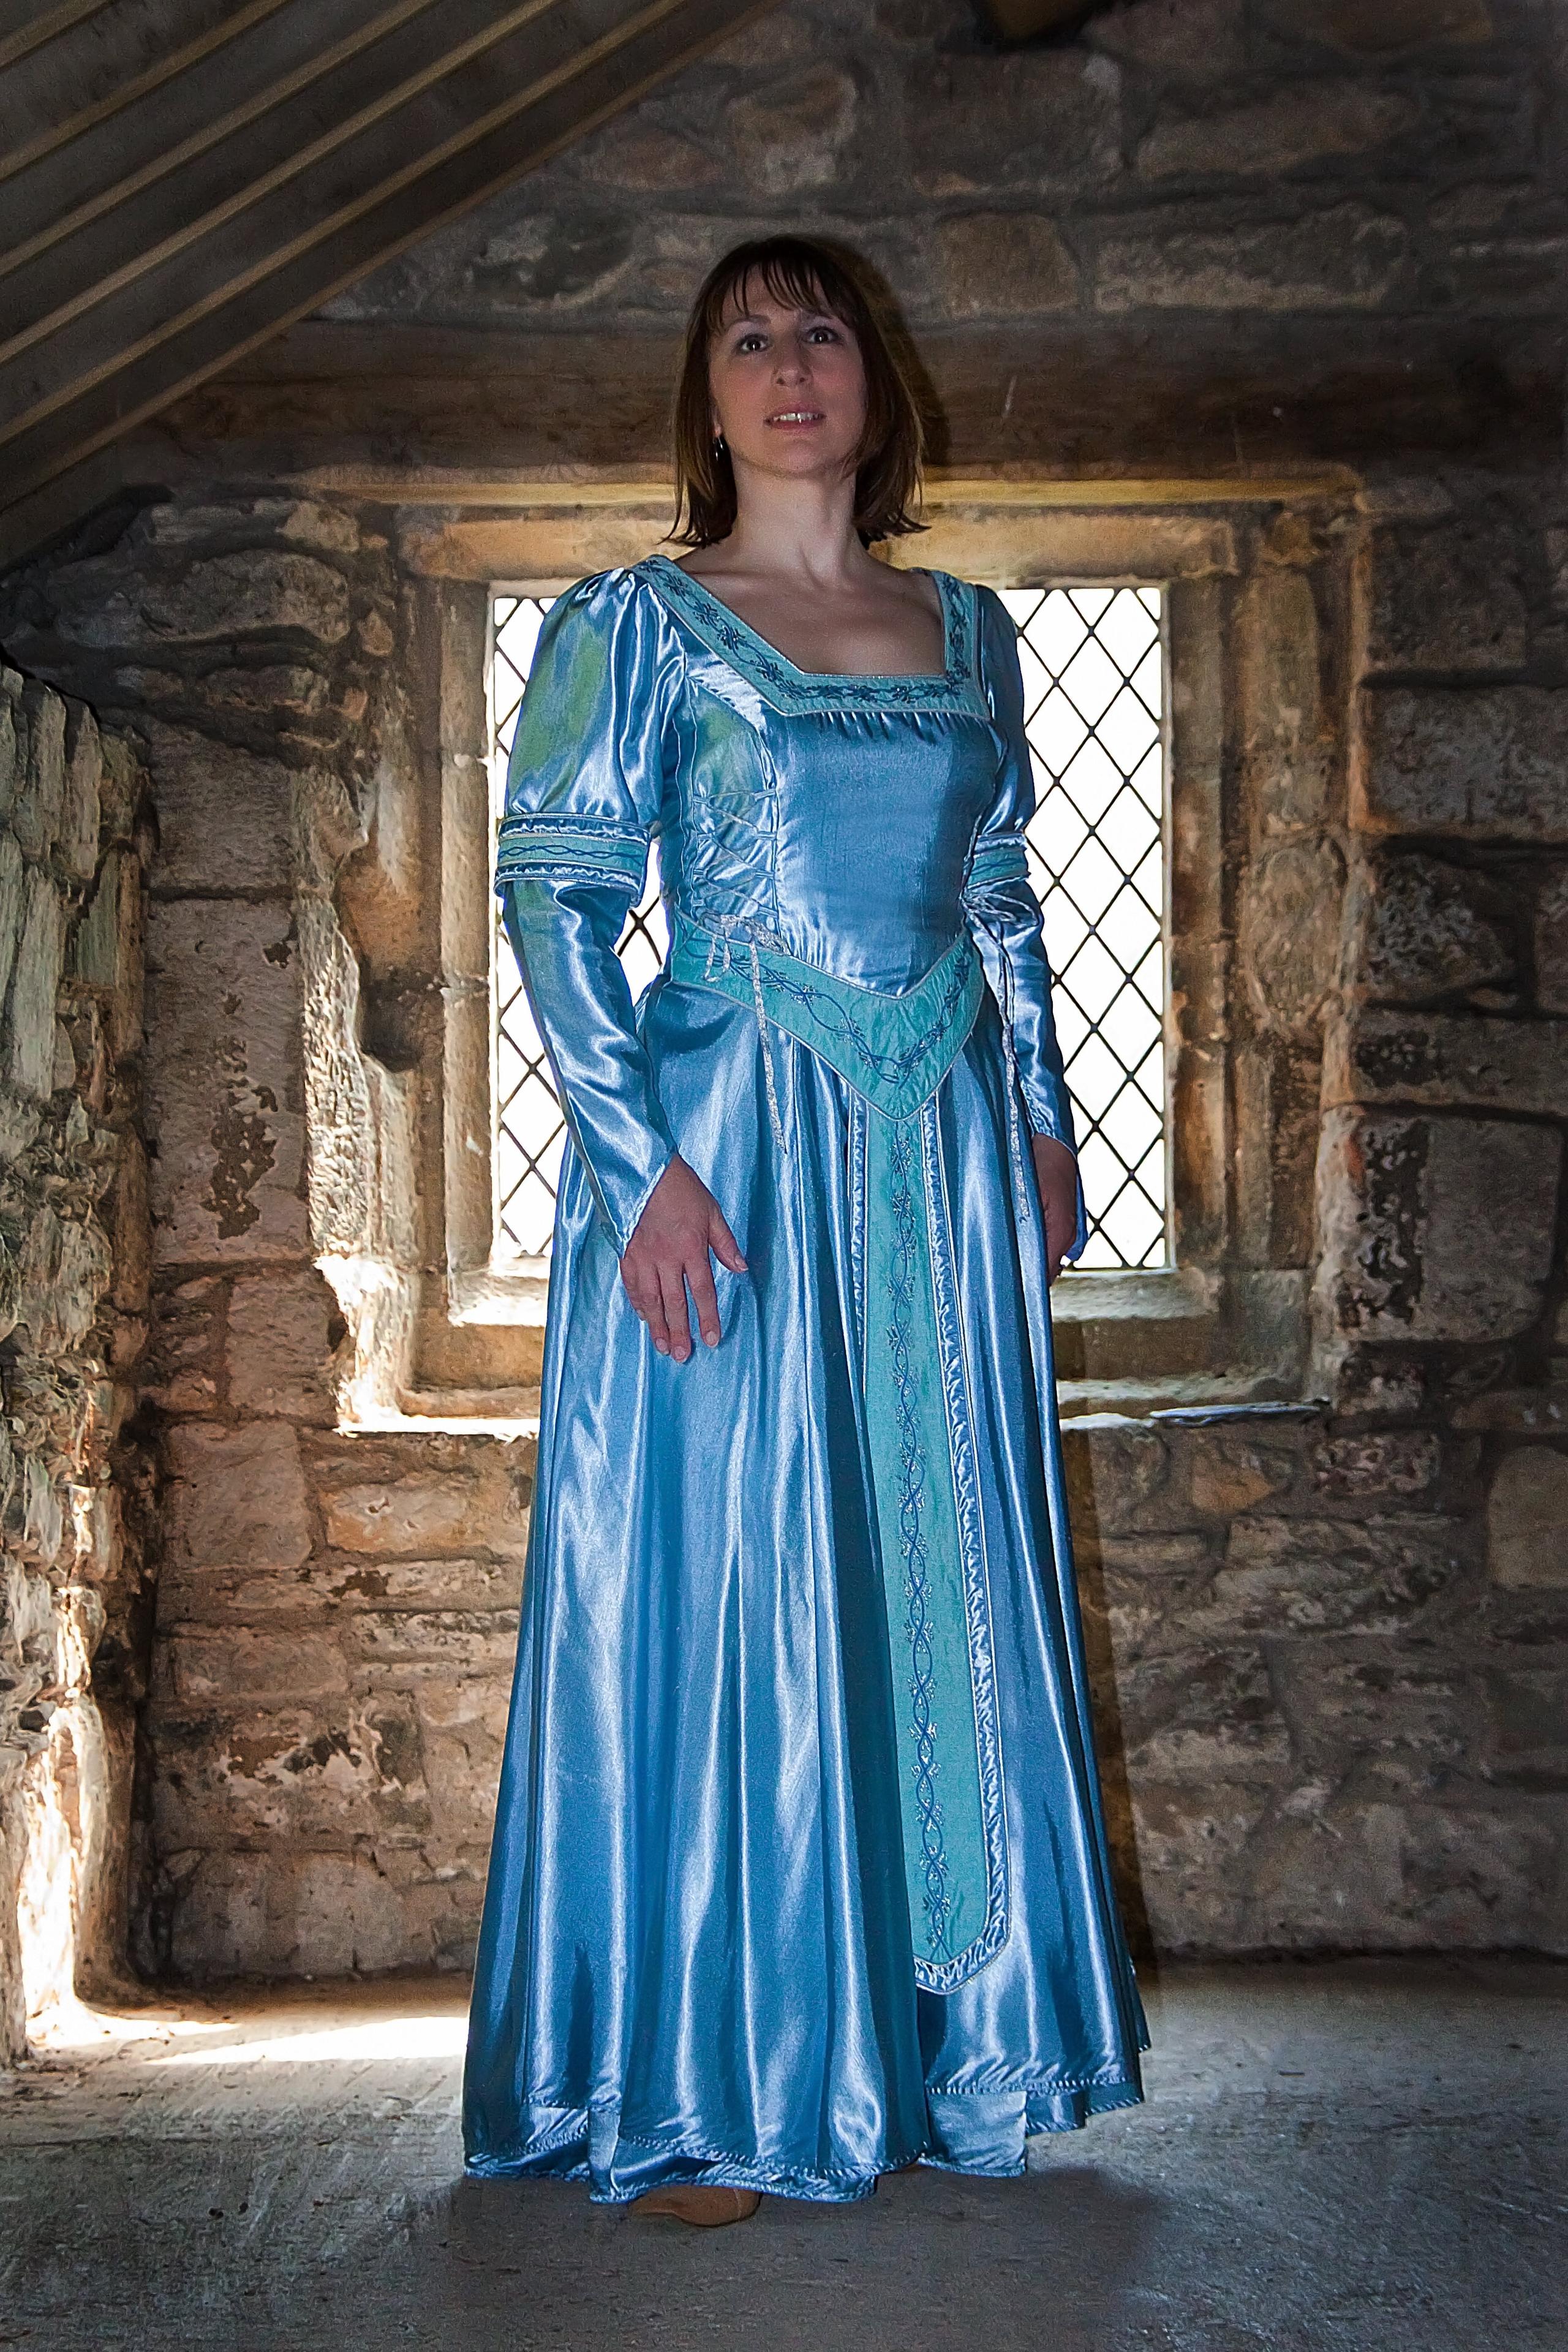 Duck egg blue medieval gown